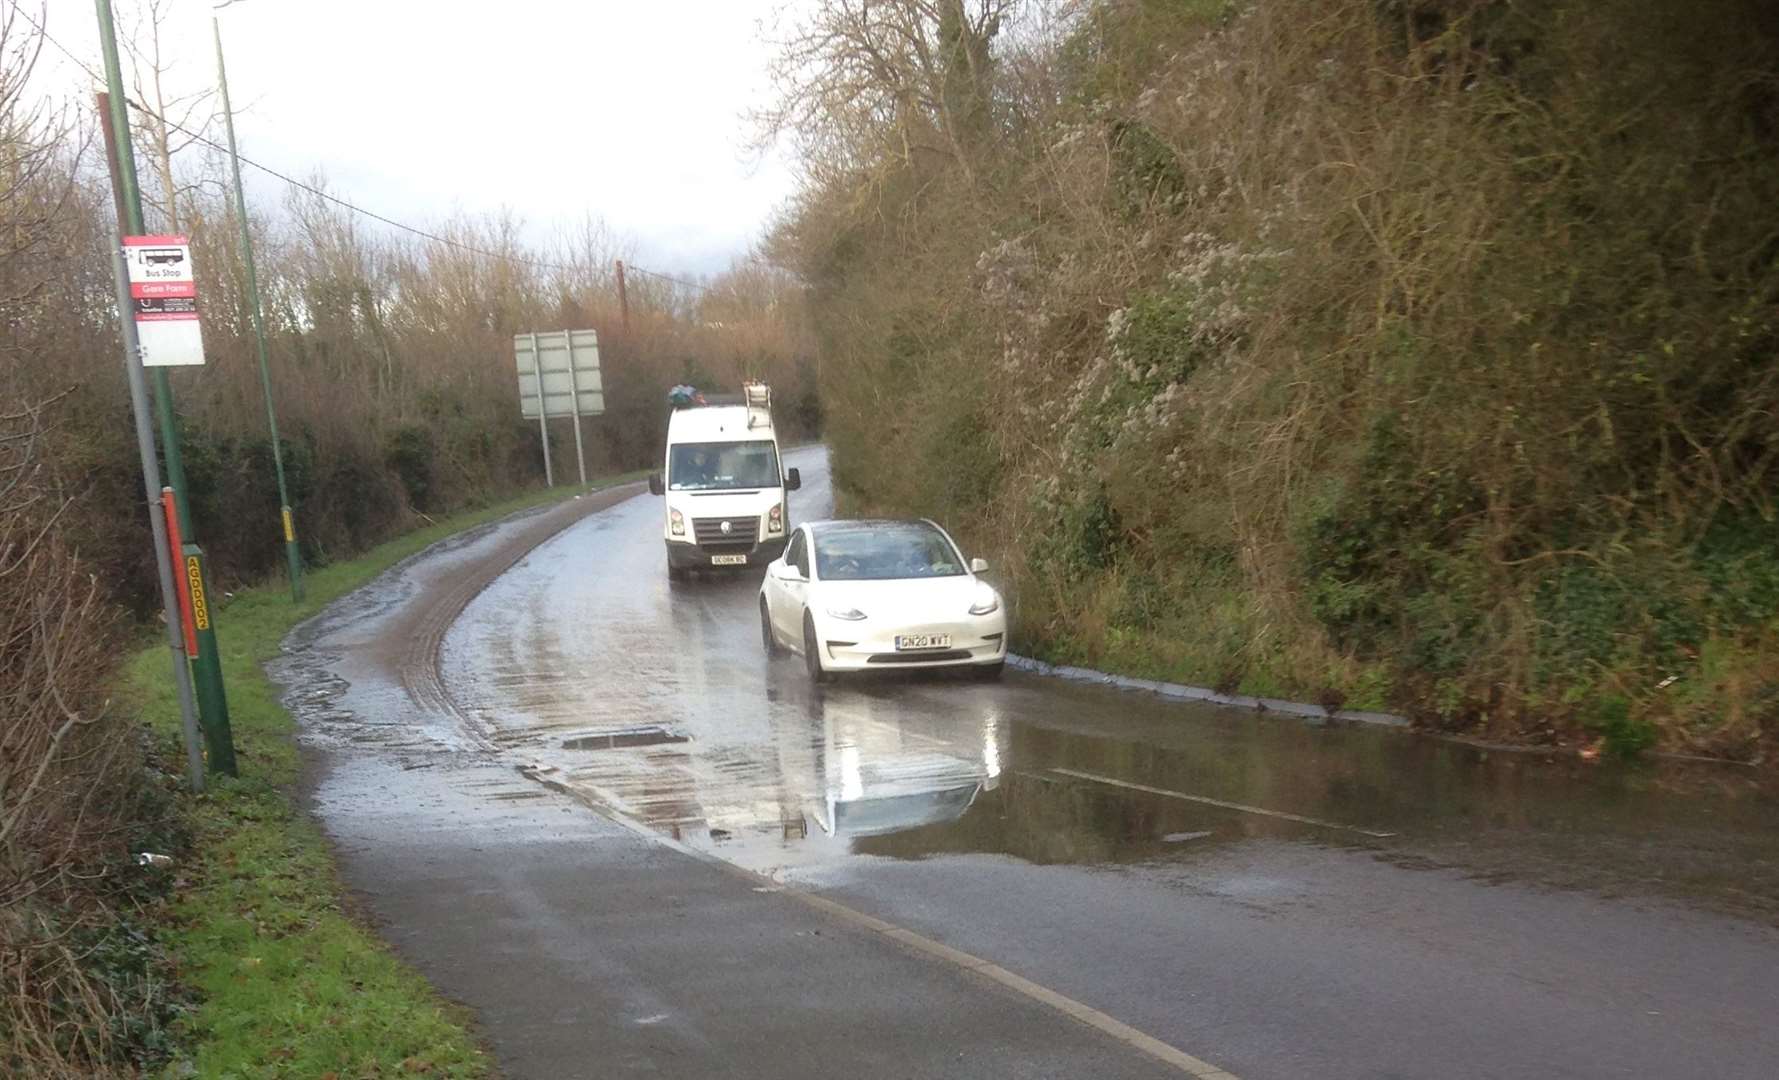 The water has created puddles at the bottom of the road